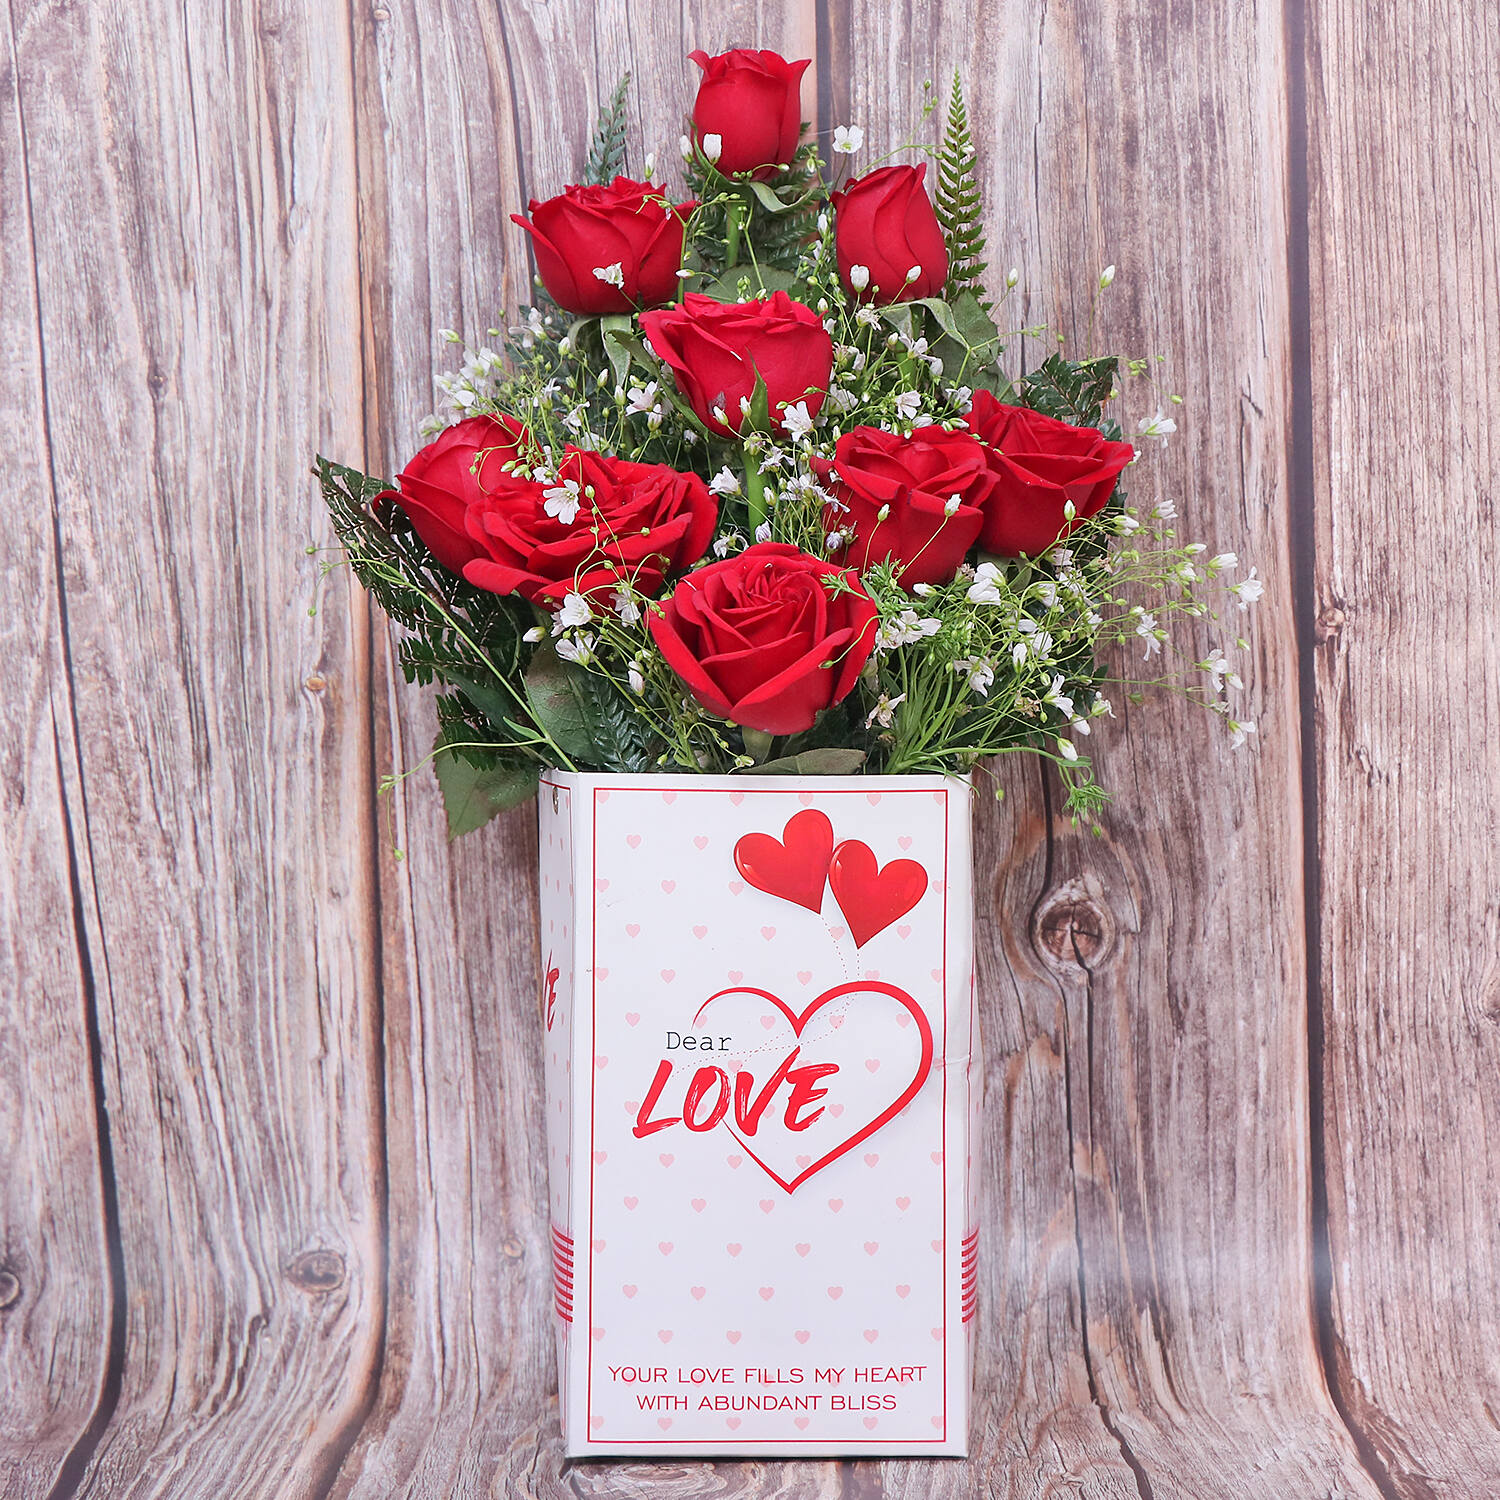 14 Days of Valentines for Your Husband - The Little Frugal House